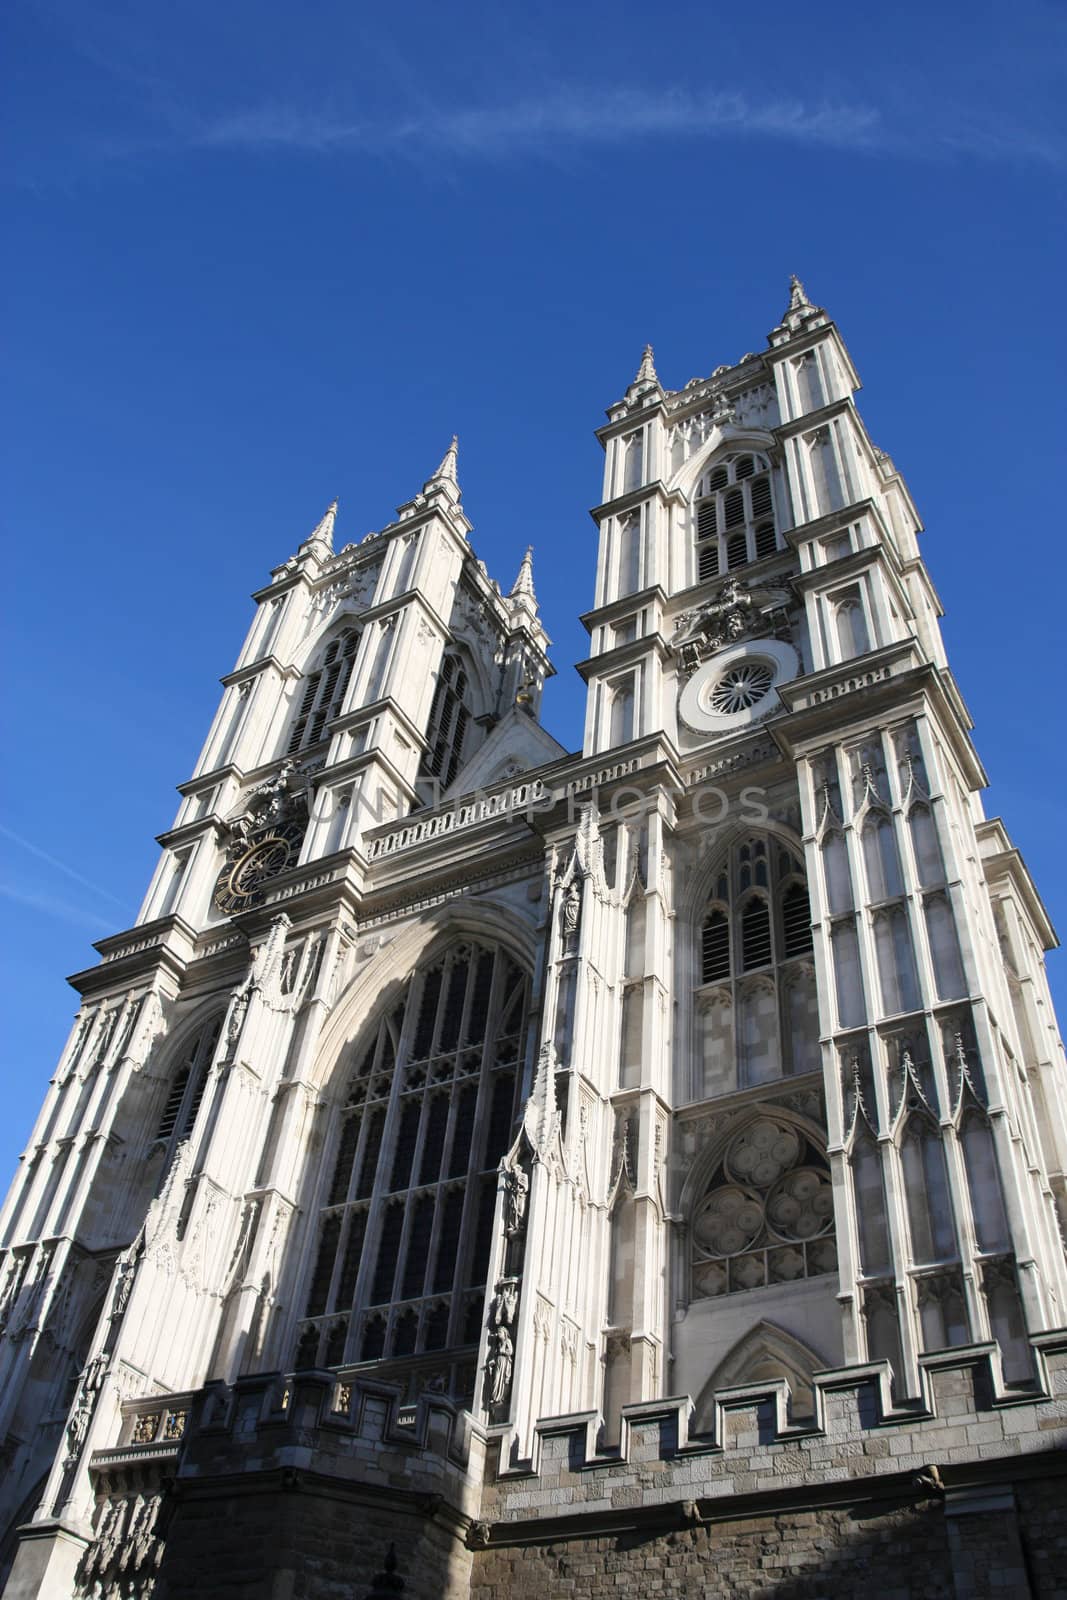 The Collegiate Church of St Peter at Westminster Abbey - landmark of London.